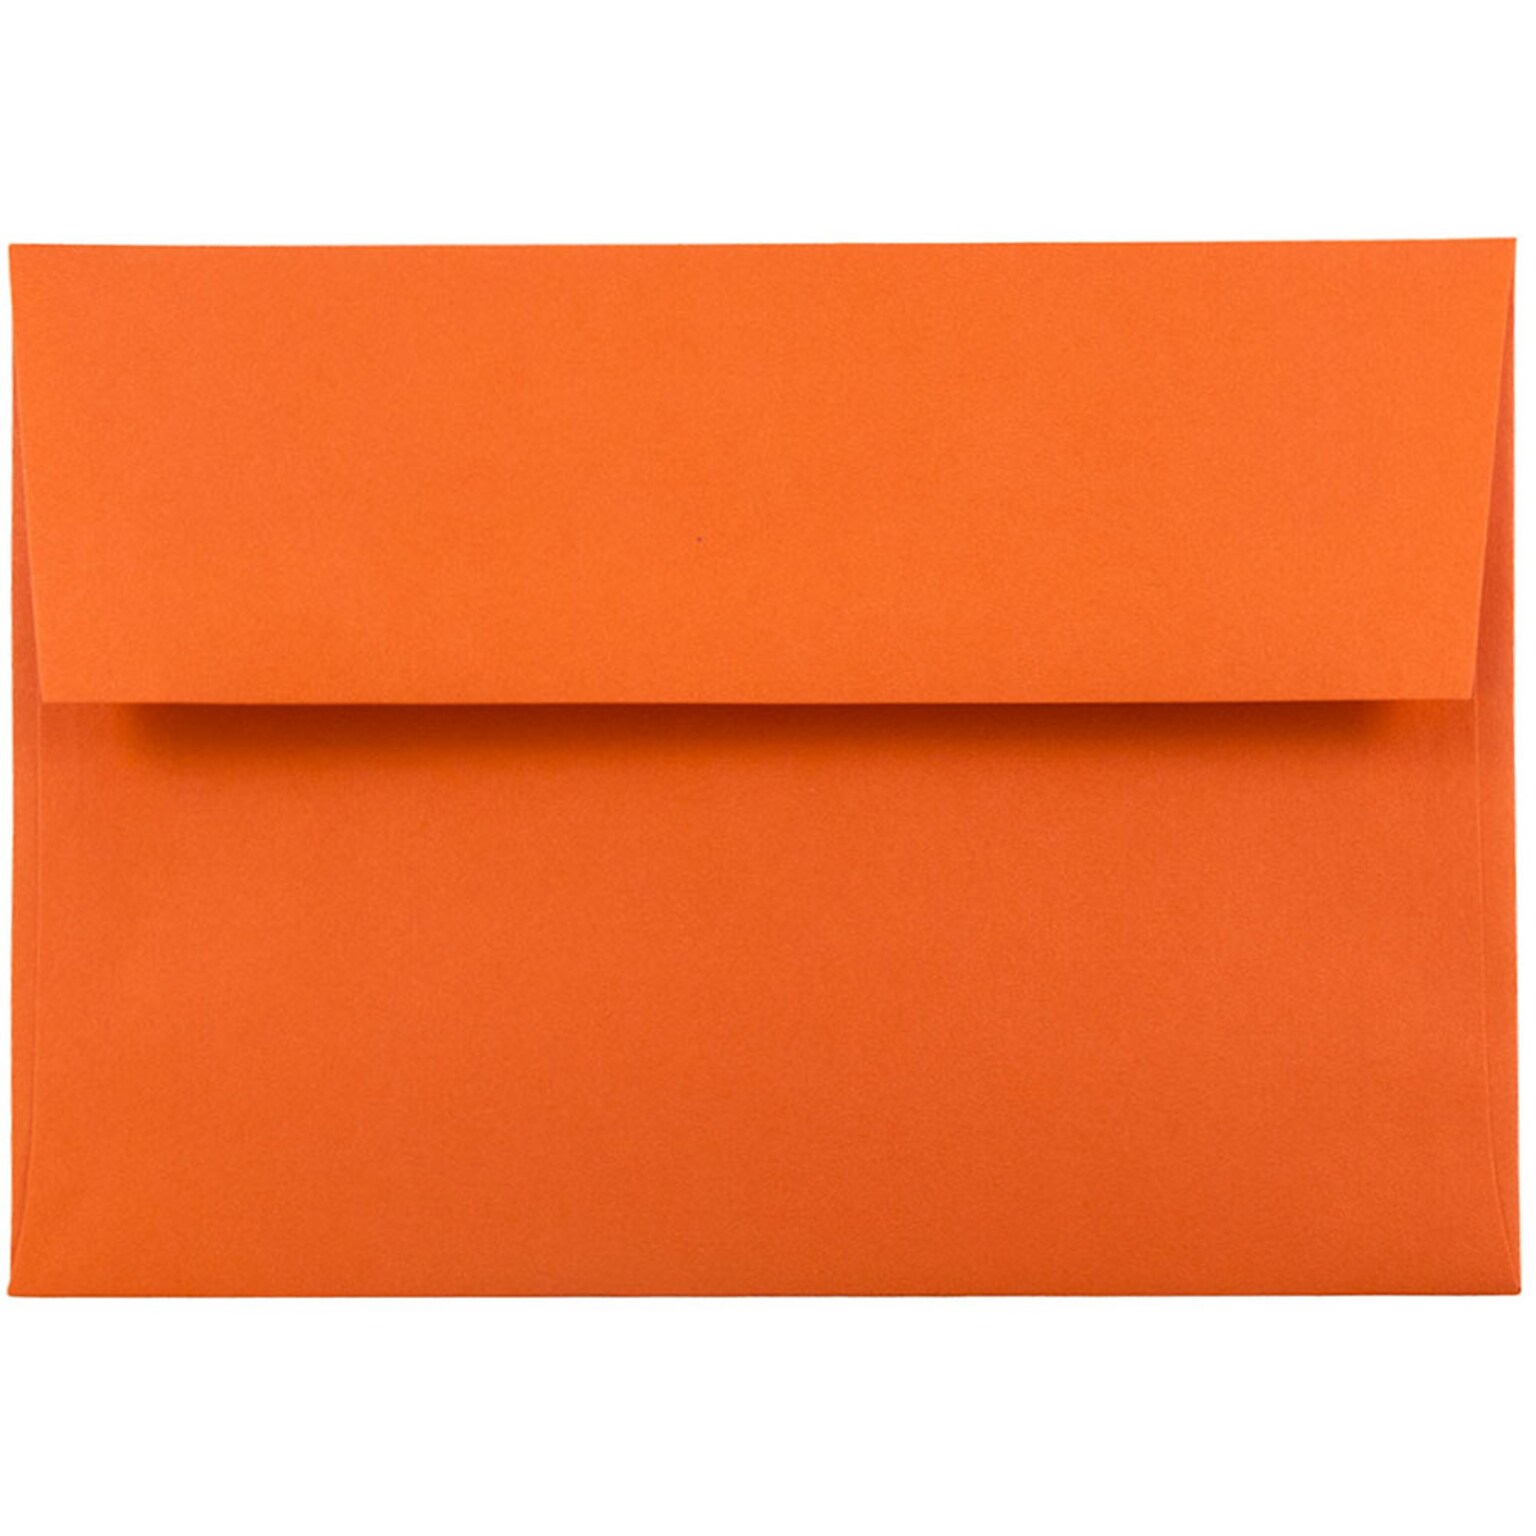 JAM Paper A6 Colored Invitation Envelopes, 4.75 x 6.5, Orange Recycled, 25/Pack (15905)